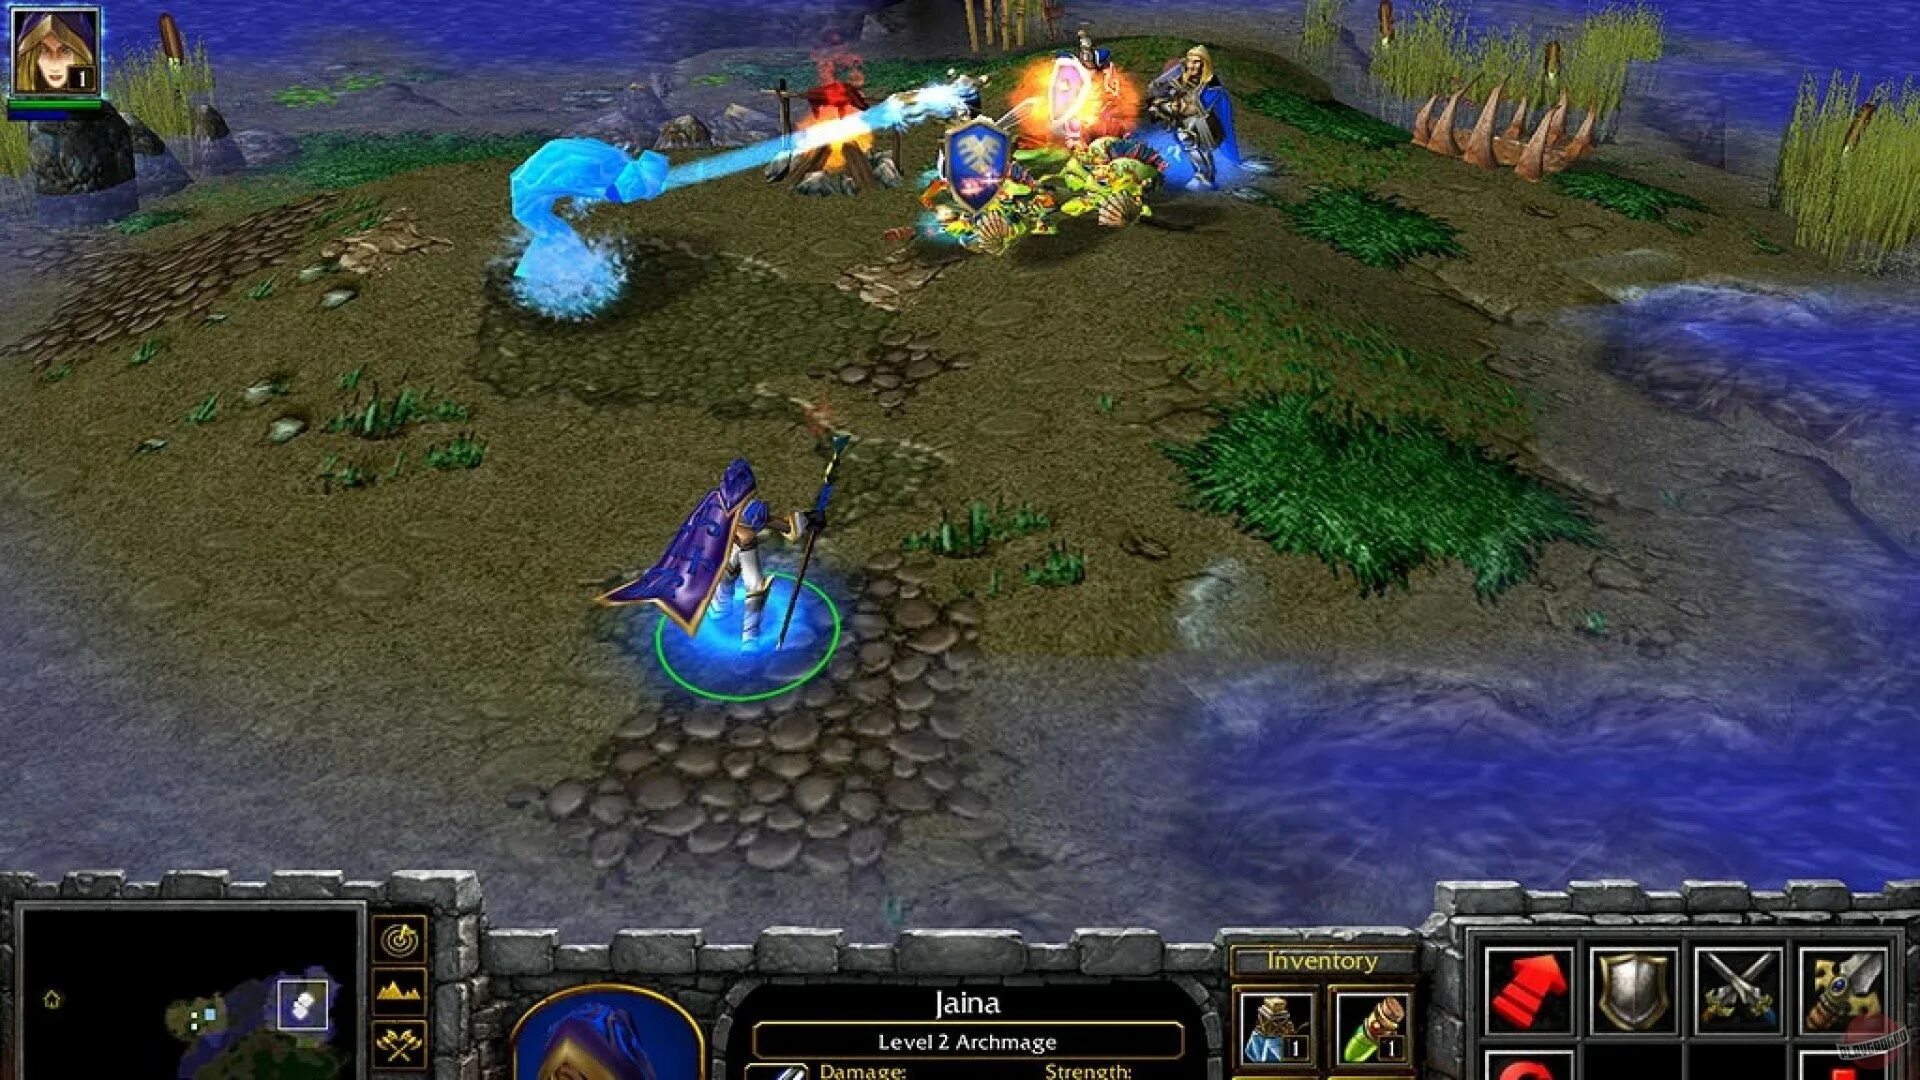 Warcraft III: Reign of Chaos (2002). Warcraft 2 Reign of Chaos. Warcraft III: the Frozen Throne. Warcraft 3 Reign of Chaos.